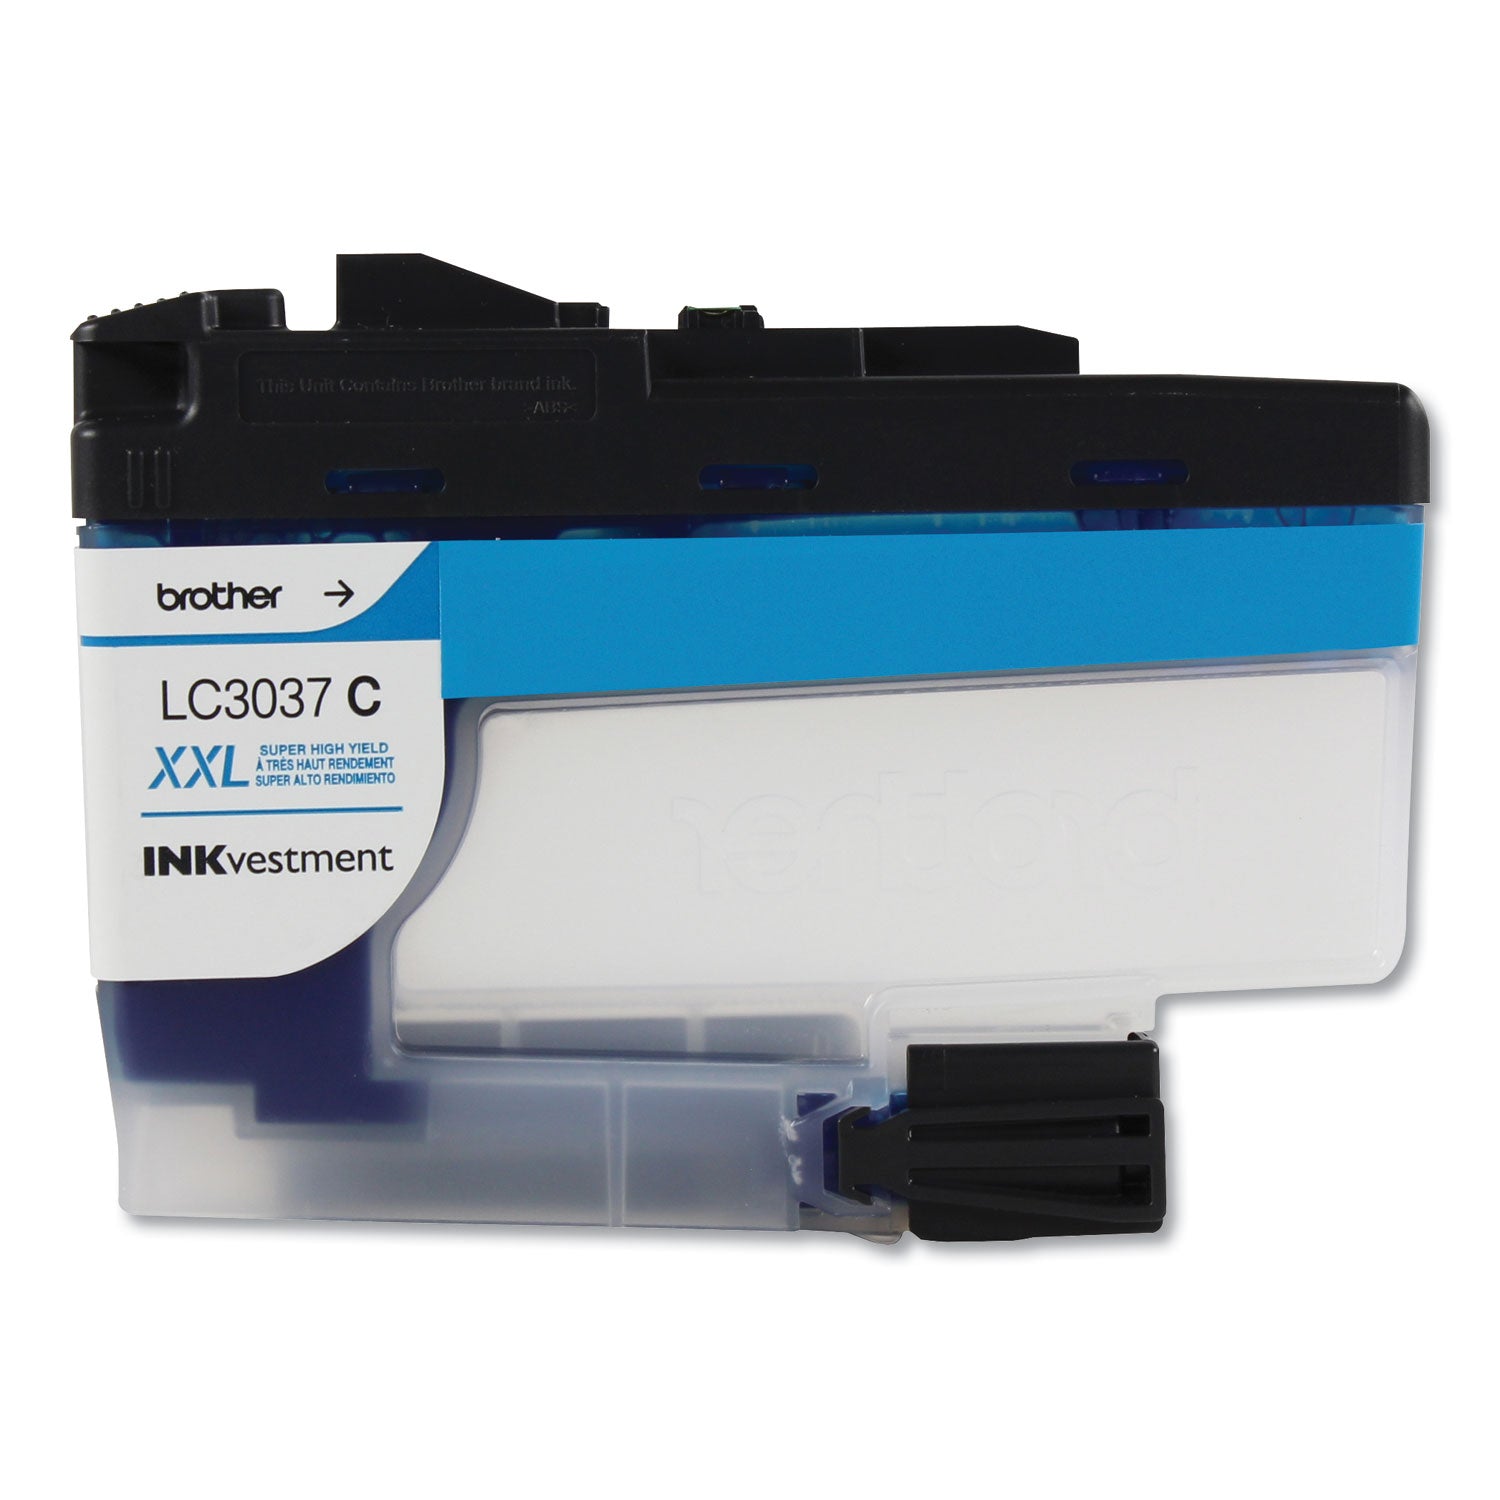 lc3037c-inkvestment-super-high-yield-ink-1500-page-yield-cyan_brtlc3037c - 2